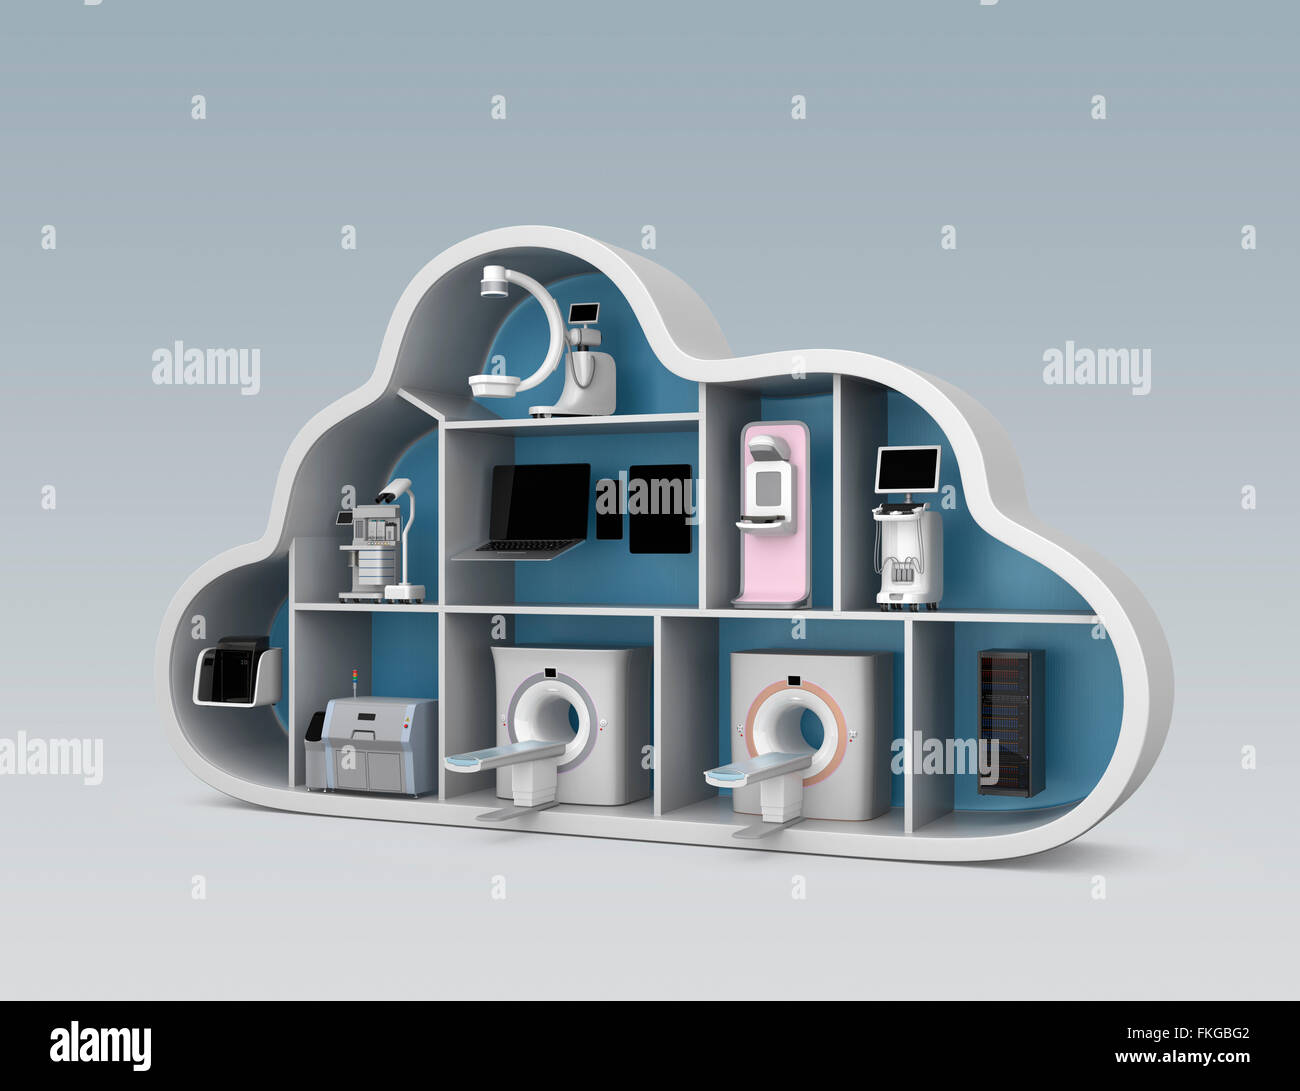 Medical imaging system and PACS server, 3D printer in cloud shape container. Concept for medical cloud service. Stock Photo